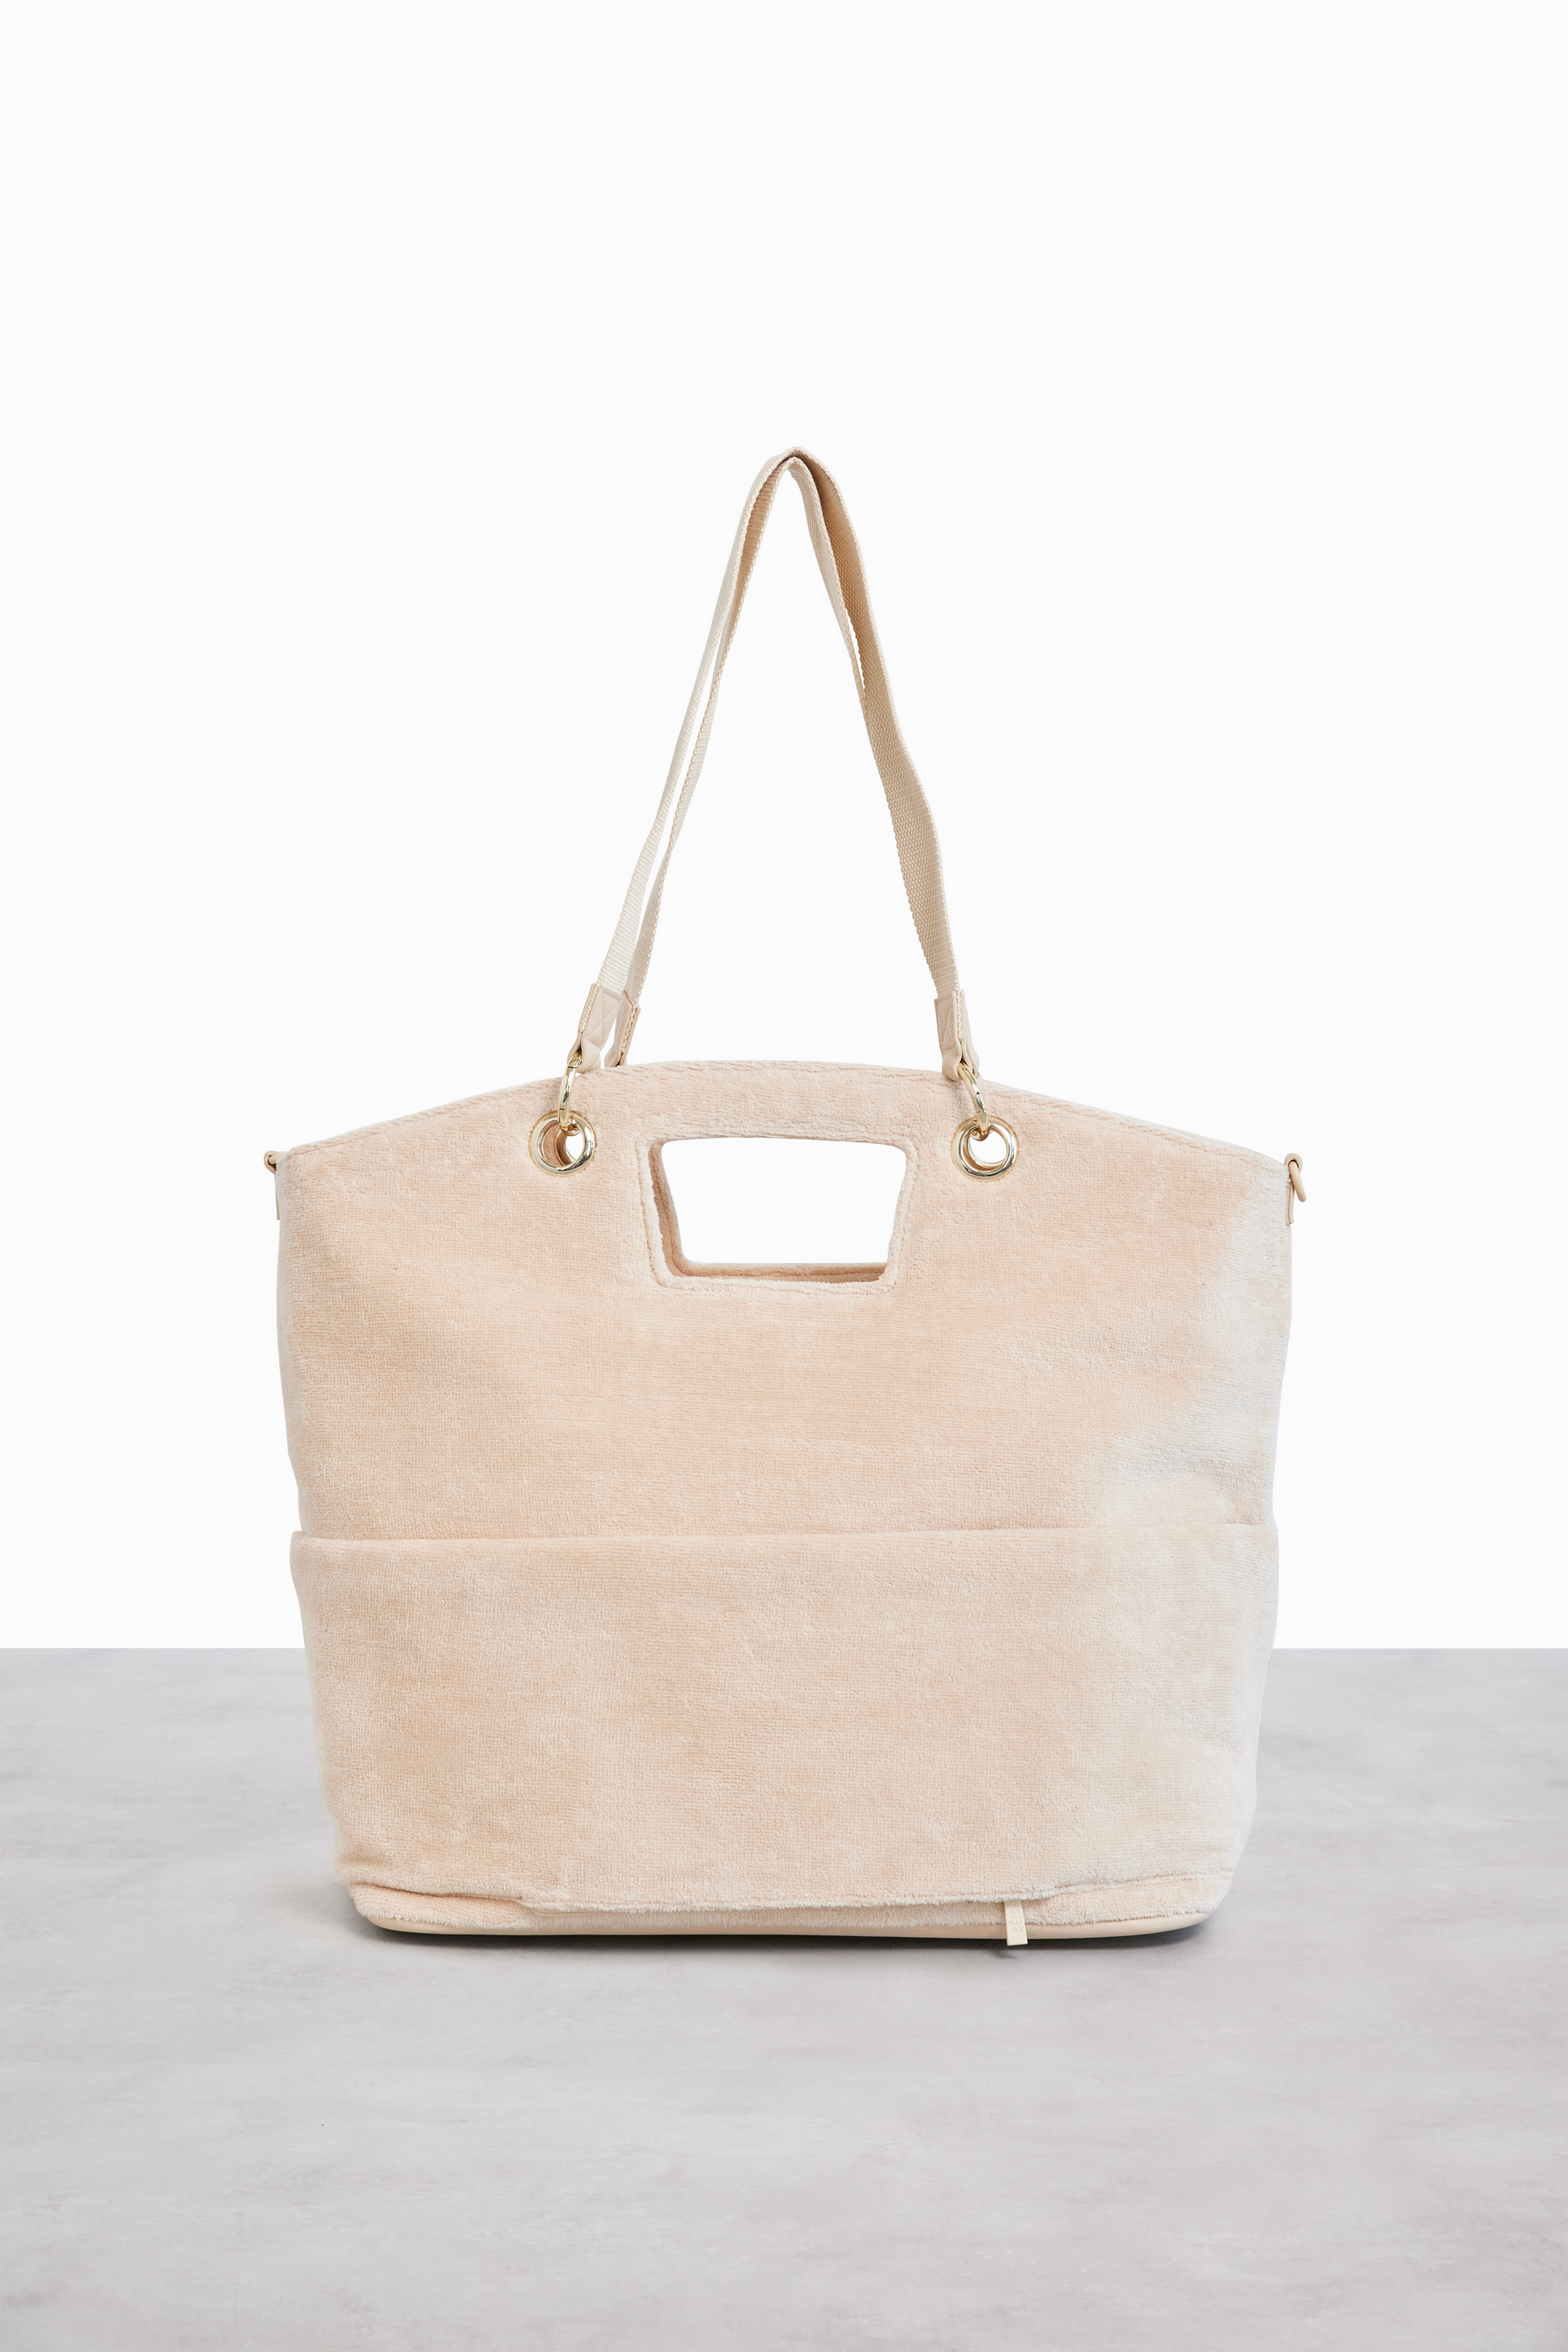 The Beige Terry Tote